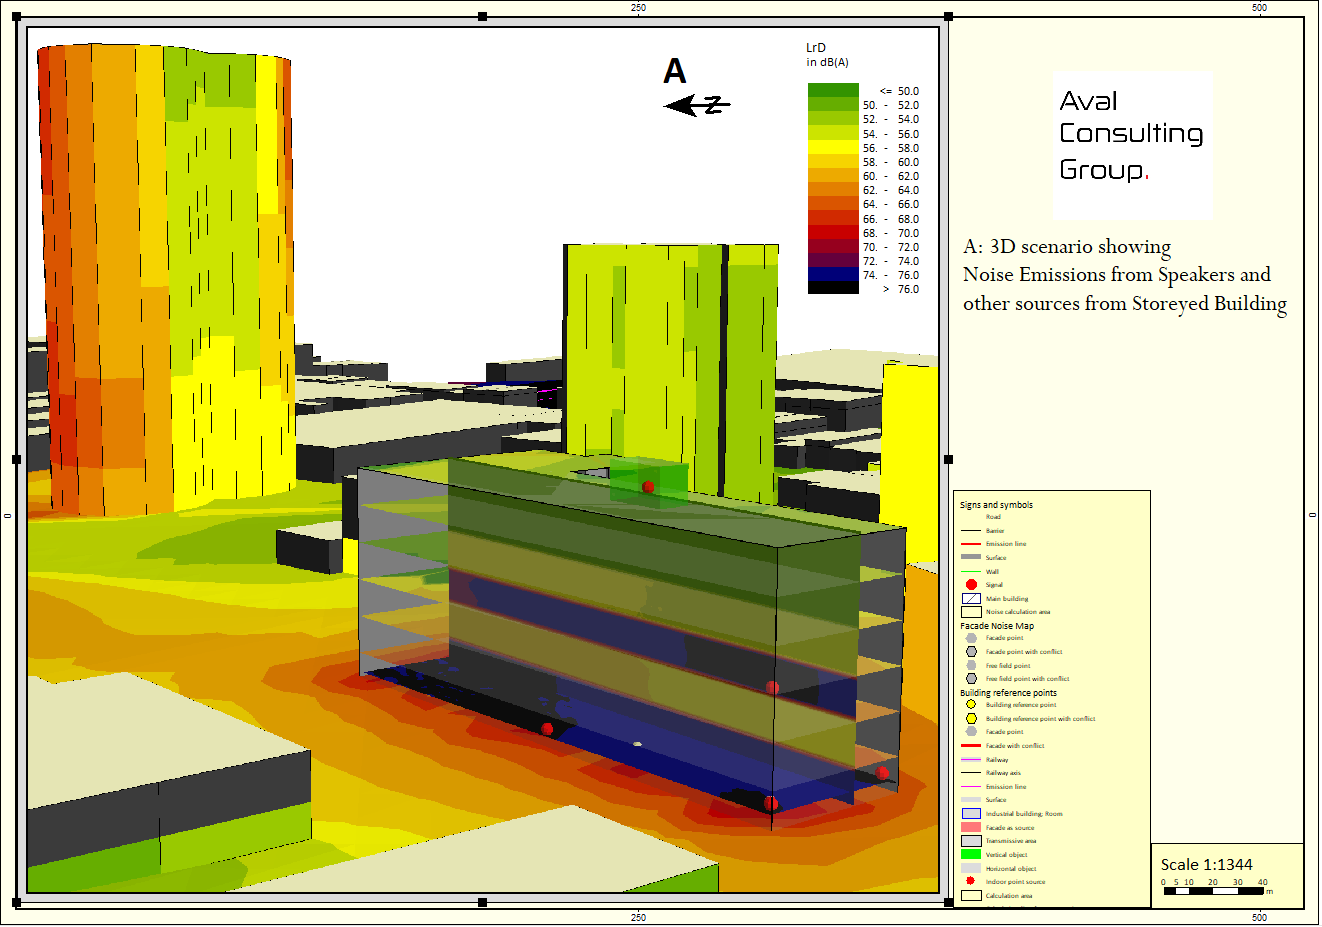 Aval consulting Group Acoustic and Noise Assessment Services for Building Acoustic